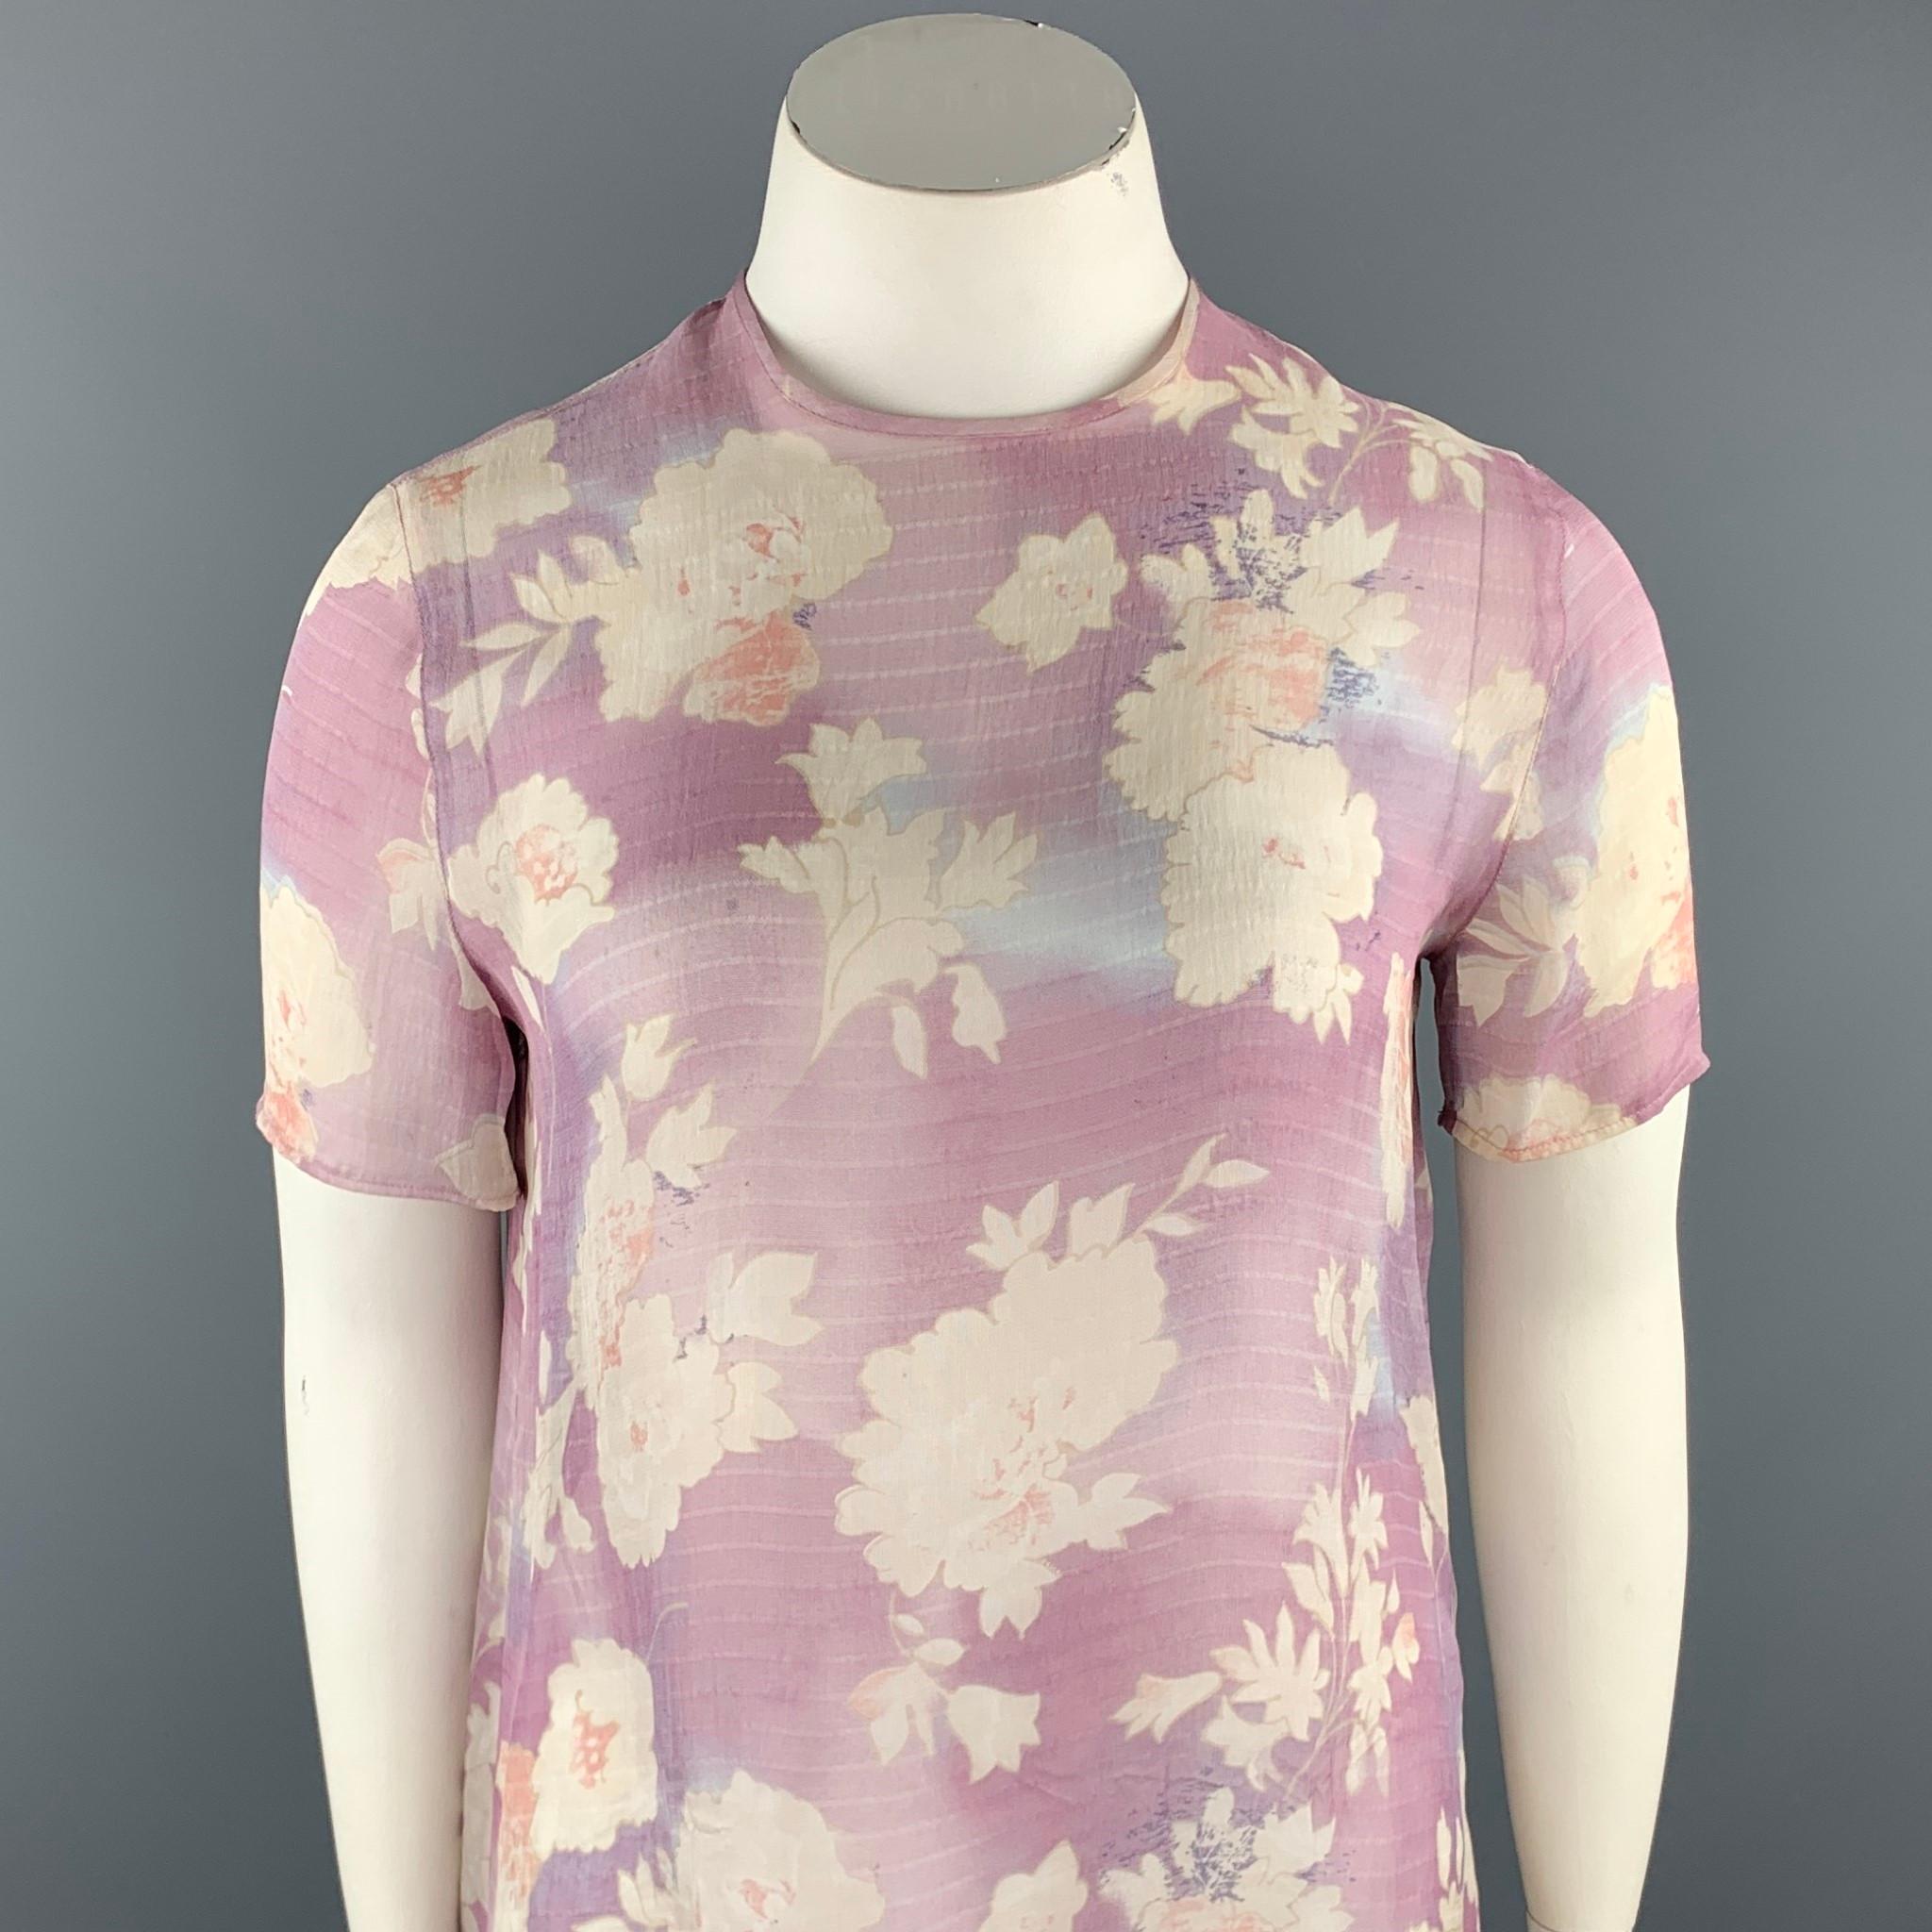 GIORGIO ARMANI T shirt blouse comes in light purple floral chiffon with shorts sleeves. Made in Italy.

Very Good Pre-Owned Condition.
Marked: US 10

Measurements:

Shoulder: 16 in.
Chest: 42 in.
Sleeve: 8.5 in.
Length: 26 in.
SKU: 94309
Category: